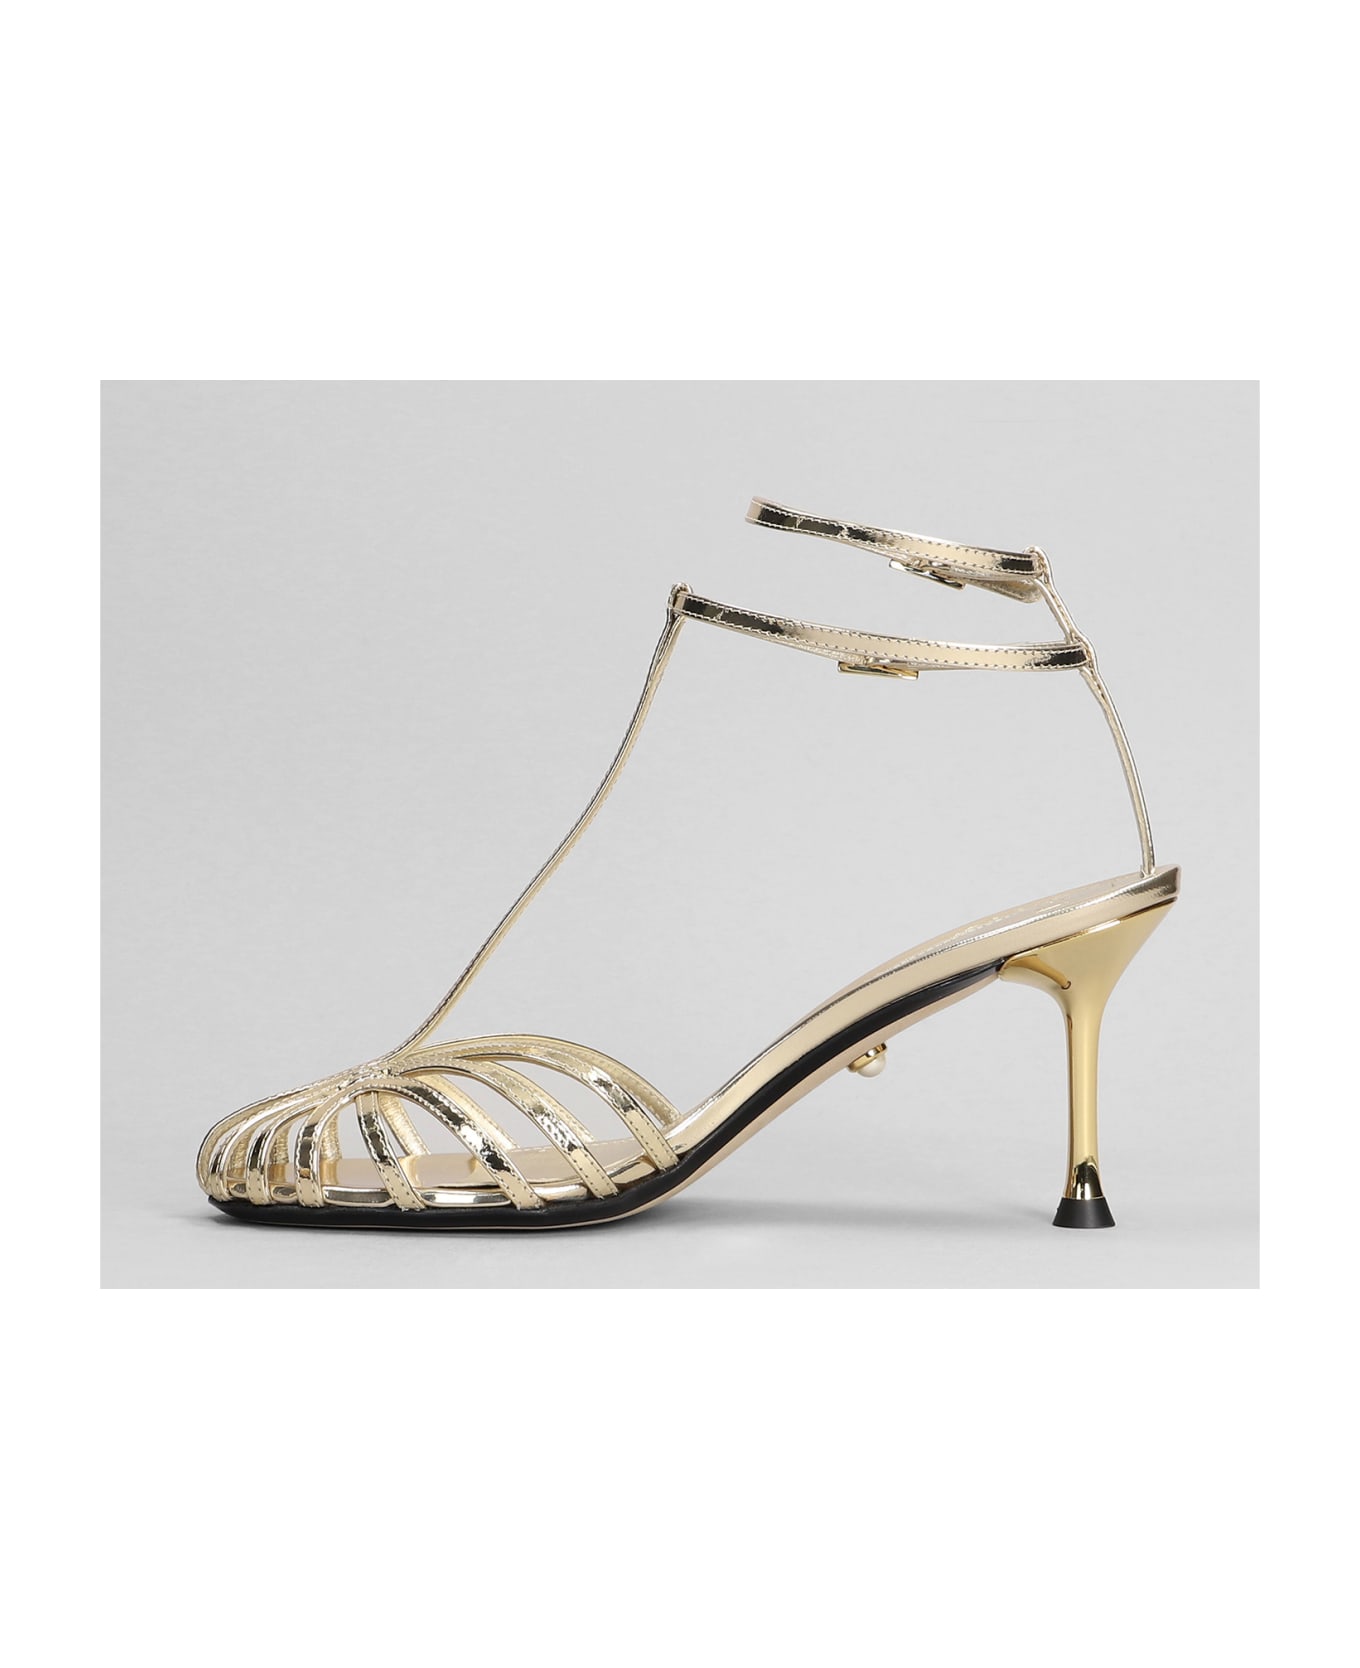 Alevì Jessie 075 Sandals In Gold Leather - gold